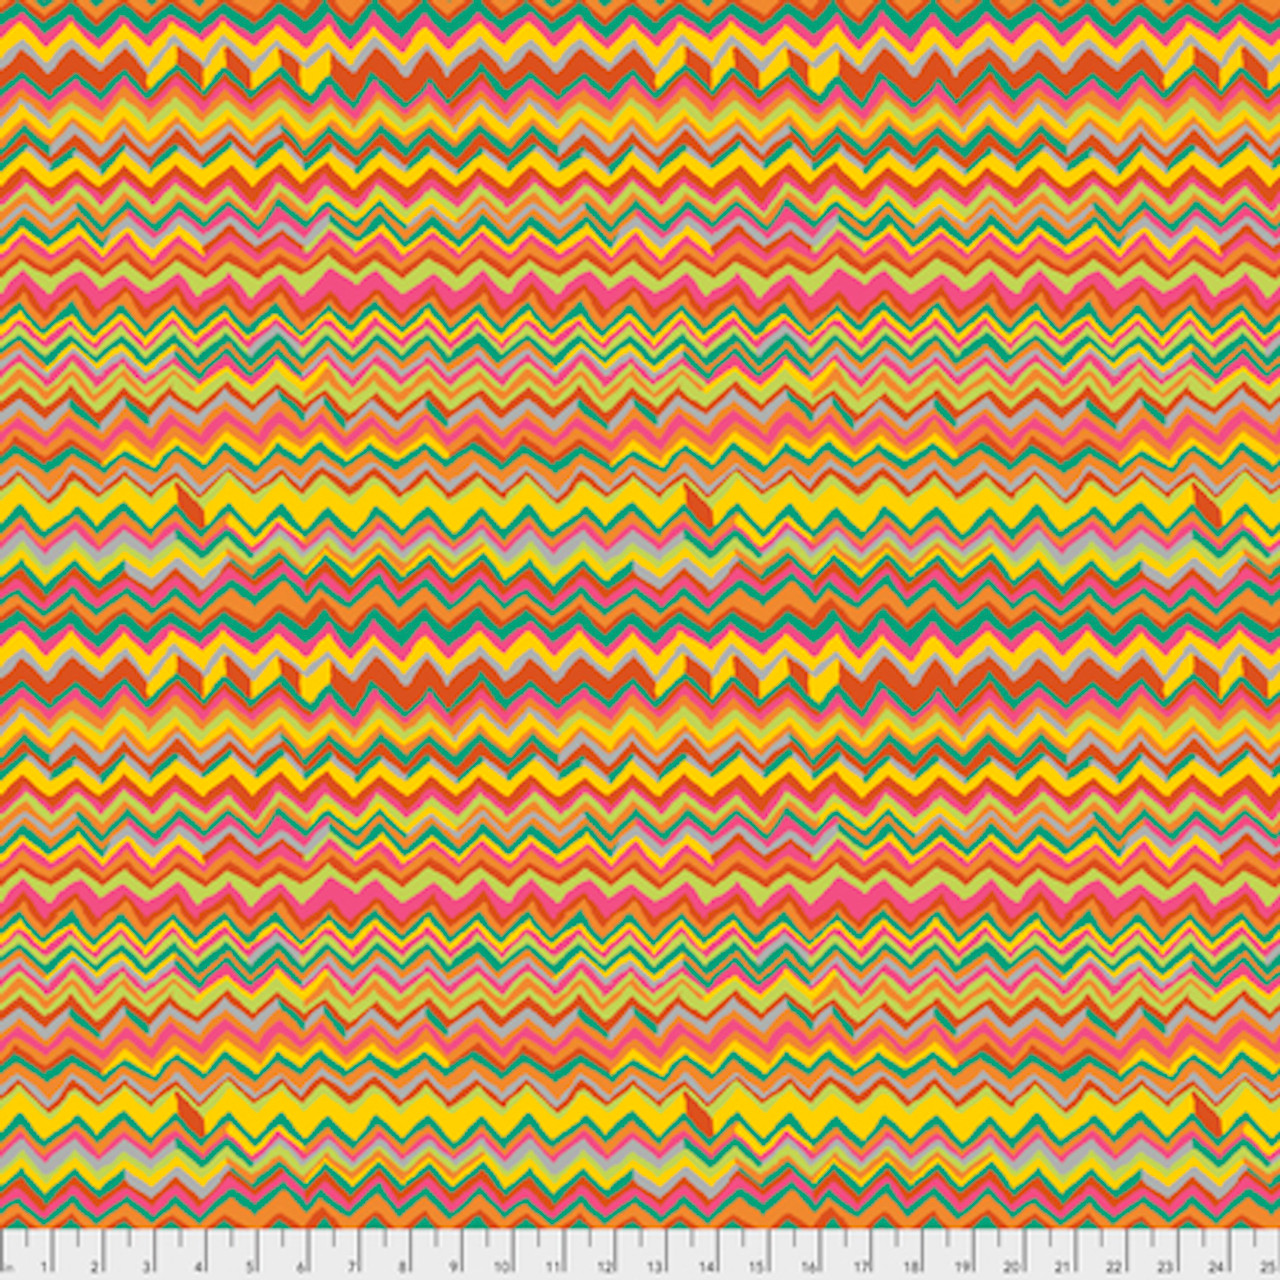 Brandon Mably PWBM043 Zig Zag Bright Quilting Cotton Fabric By The Yard